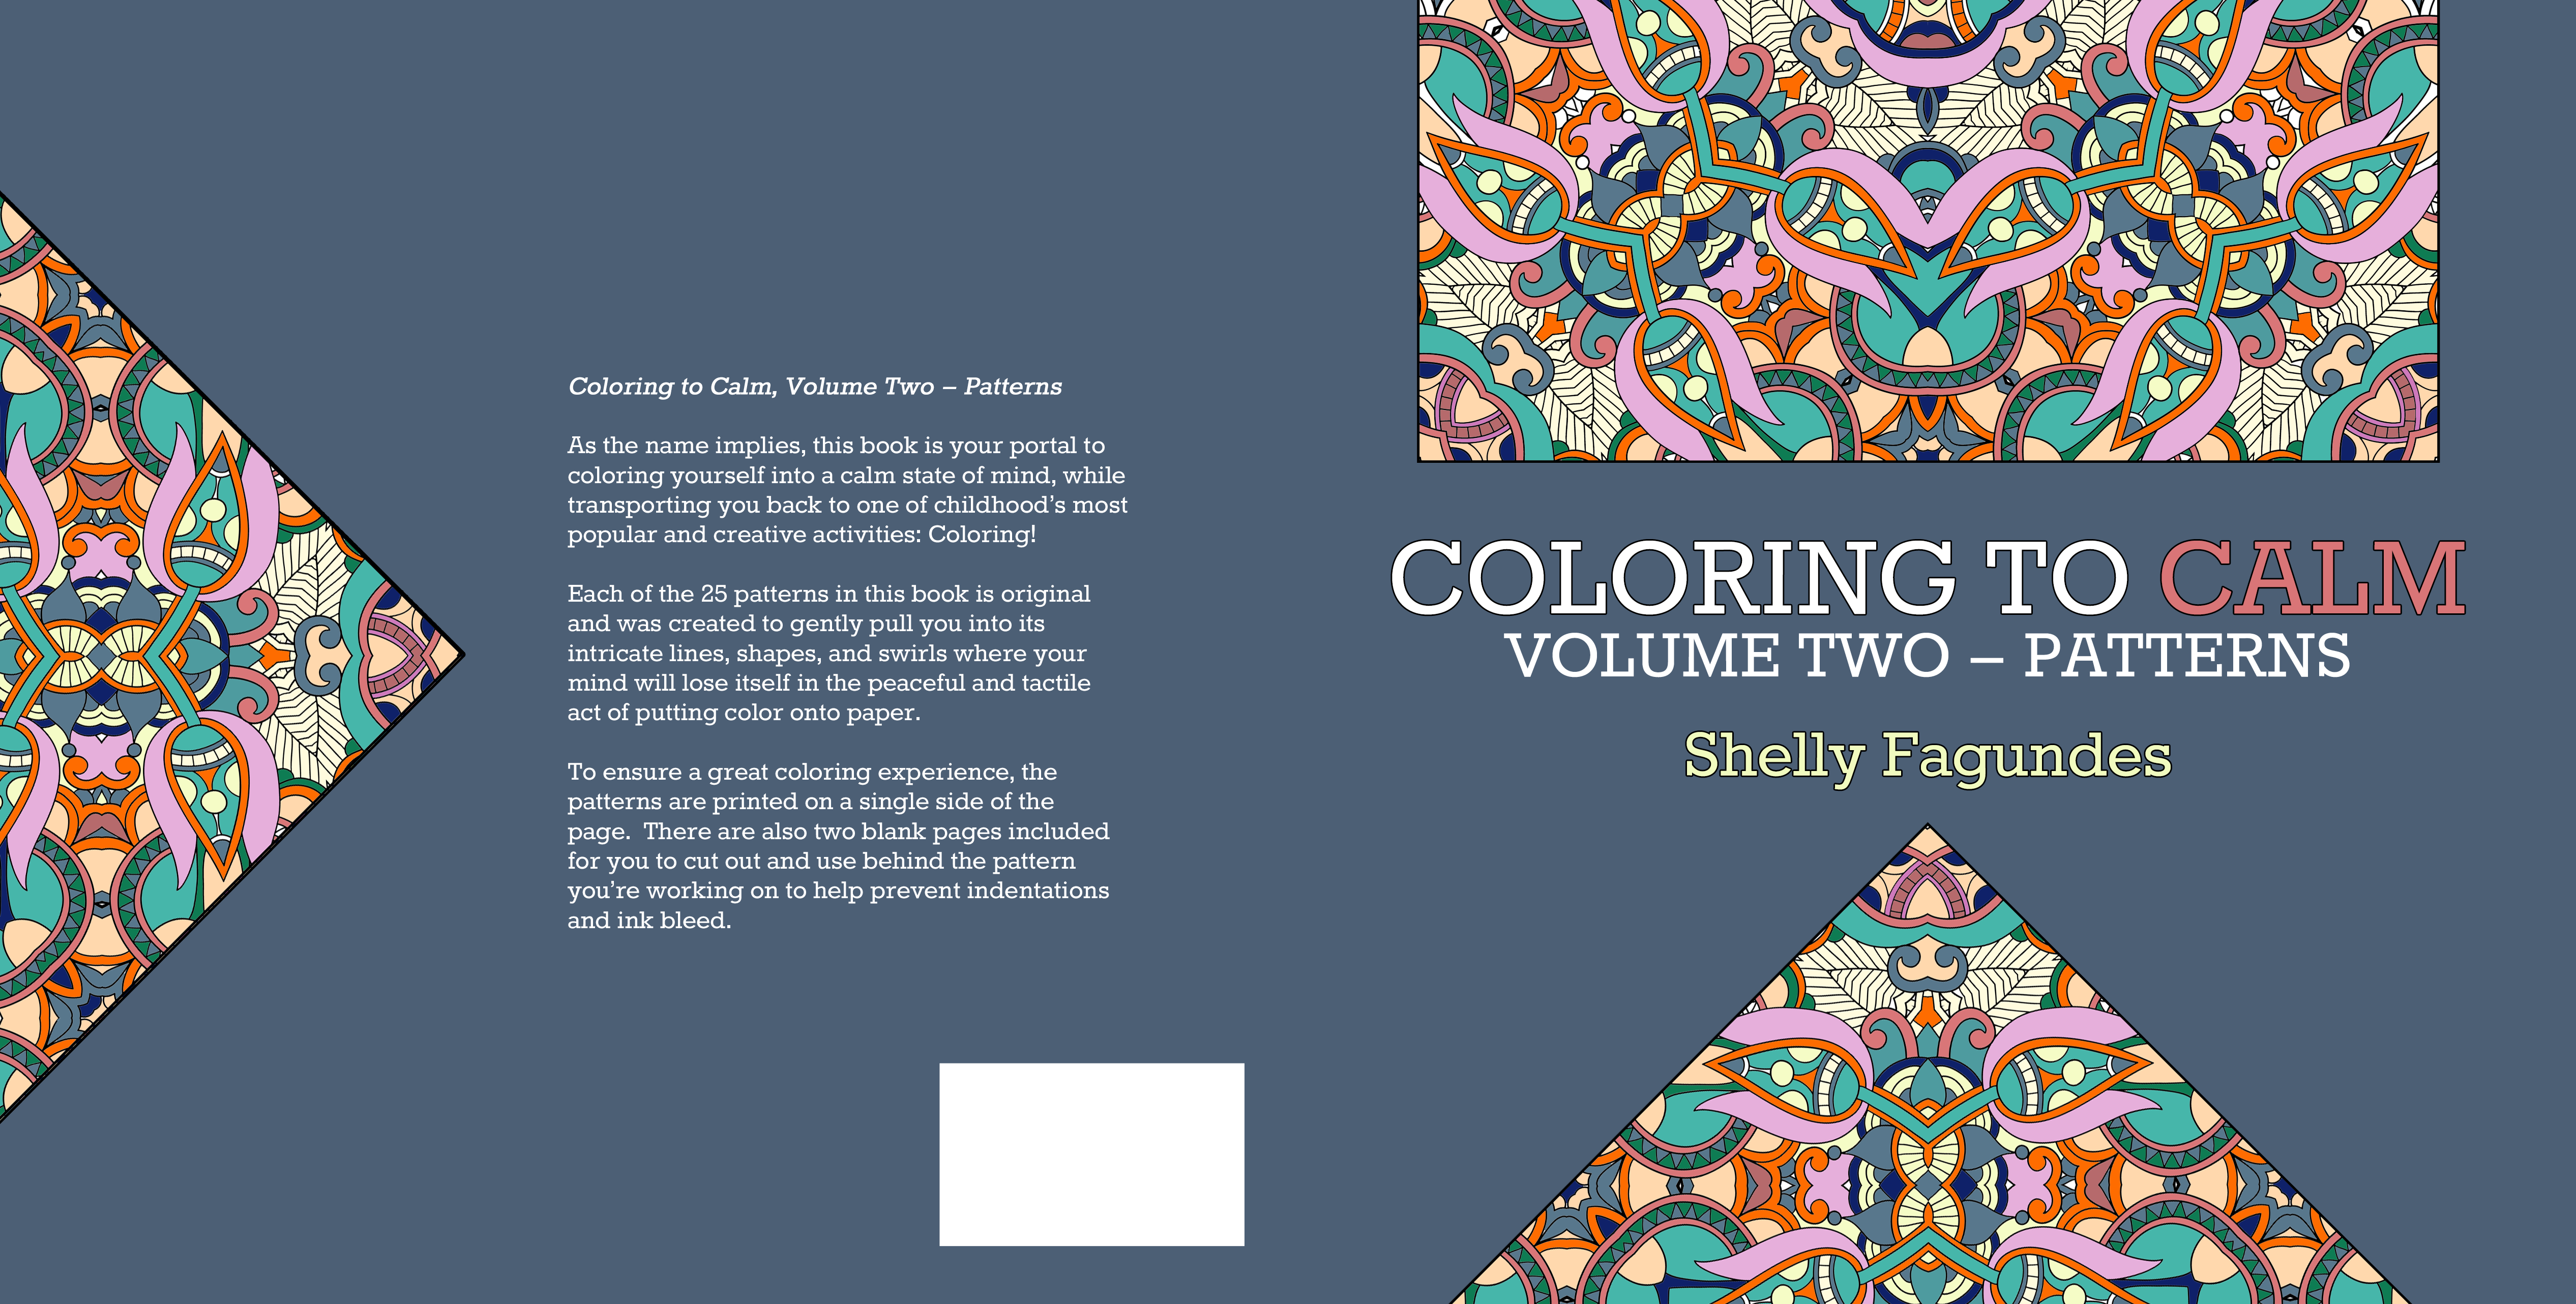 Coloring to Calm, Volume Two